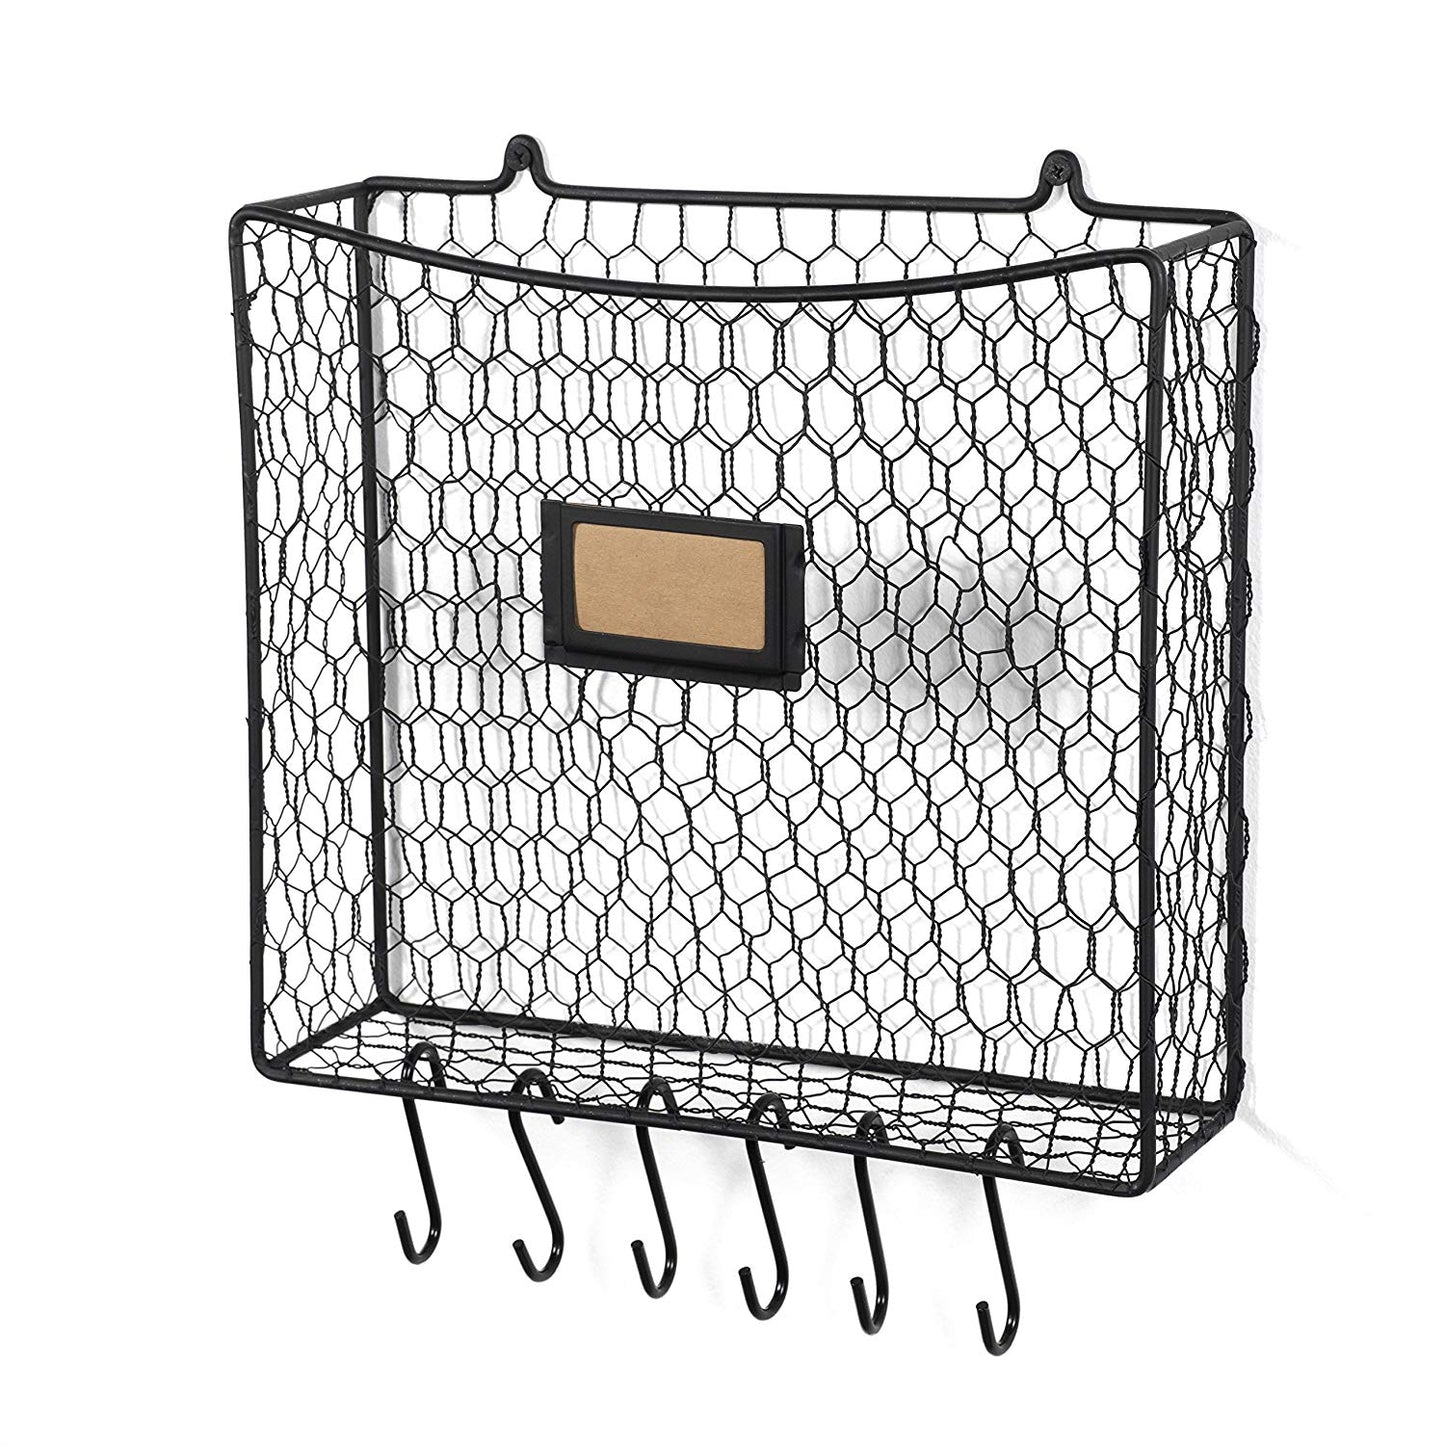 Wall35 Cestino Wall Mounted Multipurpose Mail Organizer - Chicken Wire Basket with S Hooks - Magazine Holder Coat Rack Foyer Storage with Key Hooks for Kitchen Entryway and Garage Black